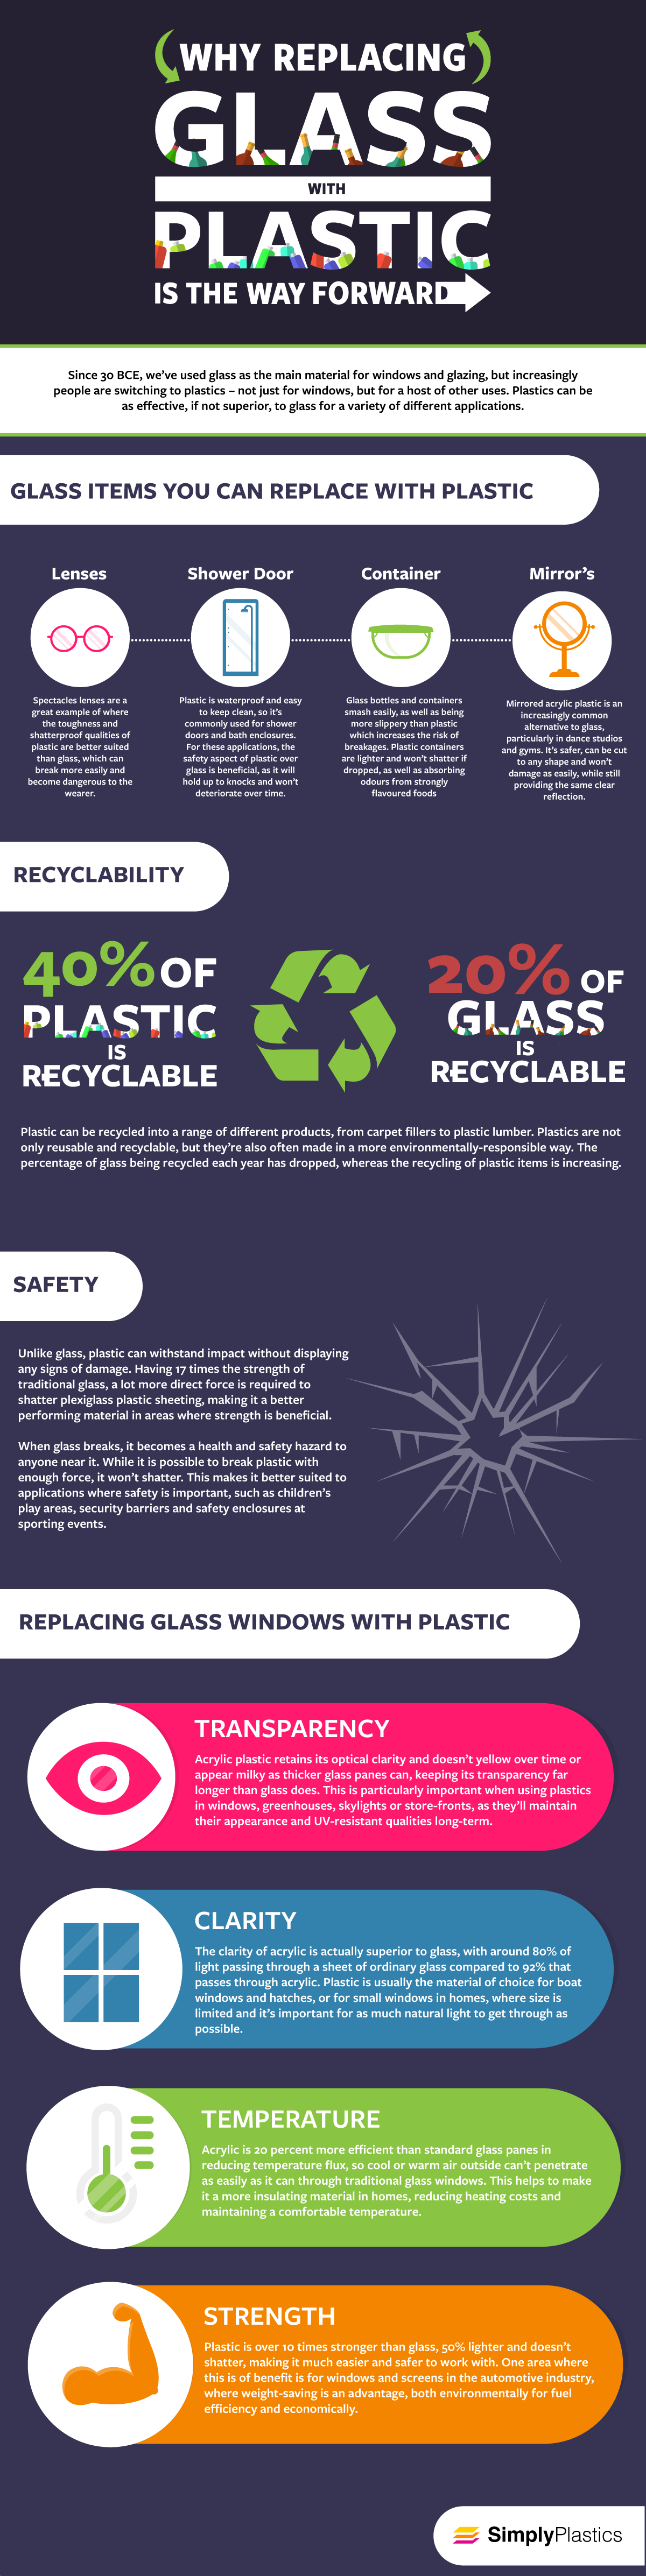 Why Replacing Glass With Plastic is the Way Forward - Infographic